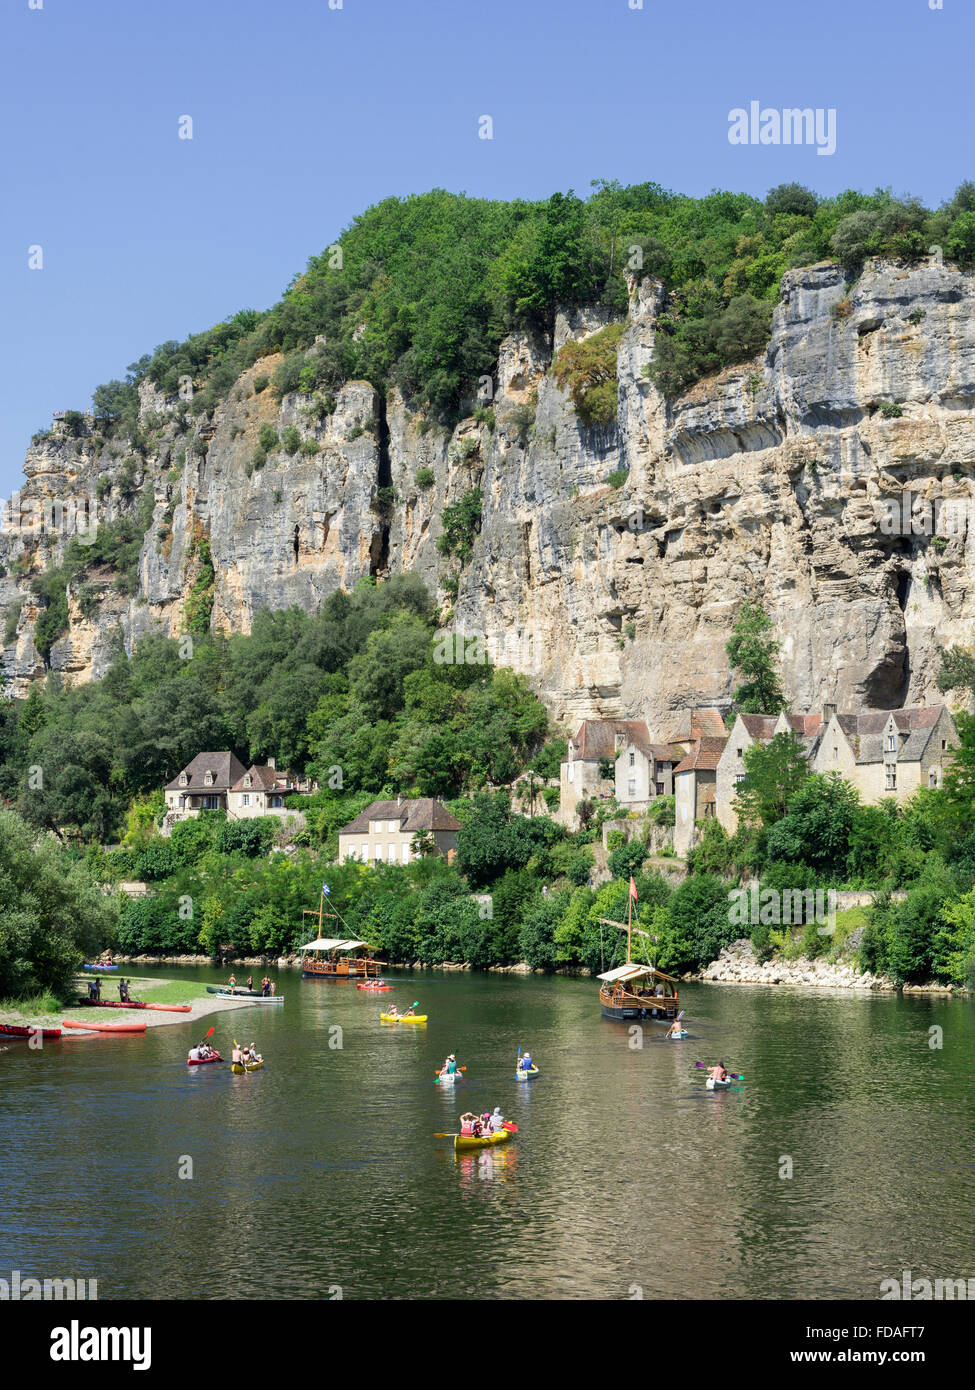 Excursion boats and kayaks on the Dordogne river, La Roque-Gageac, Aquitaine, France Stock Photo